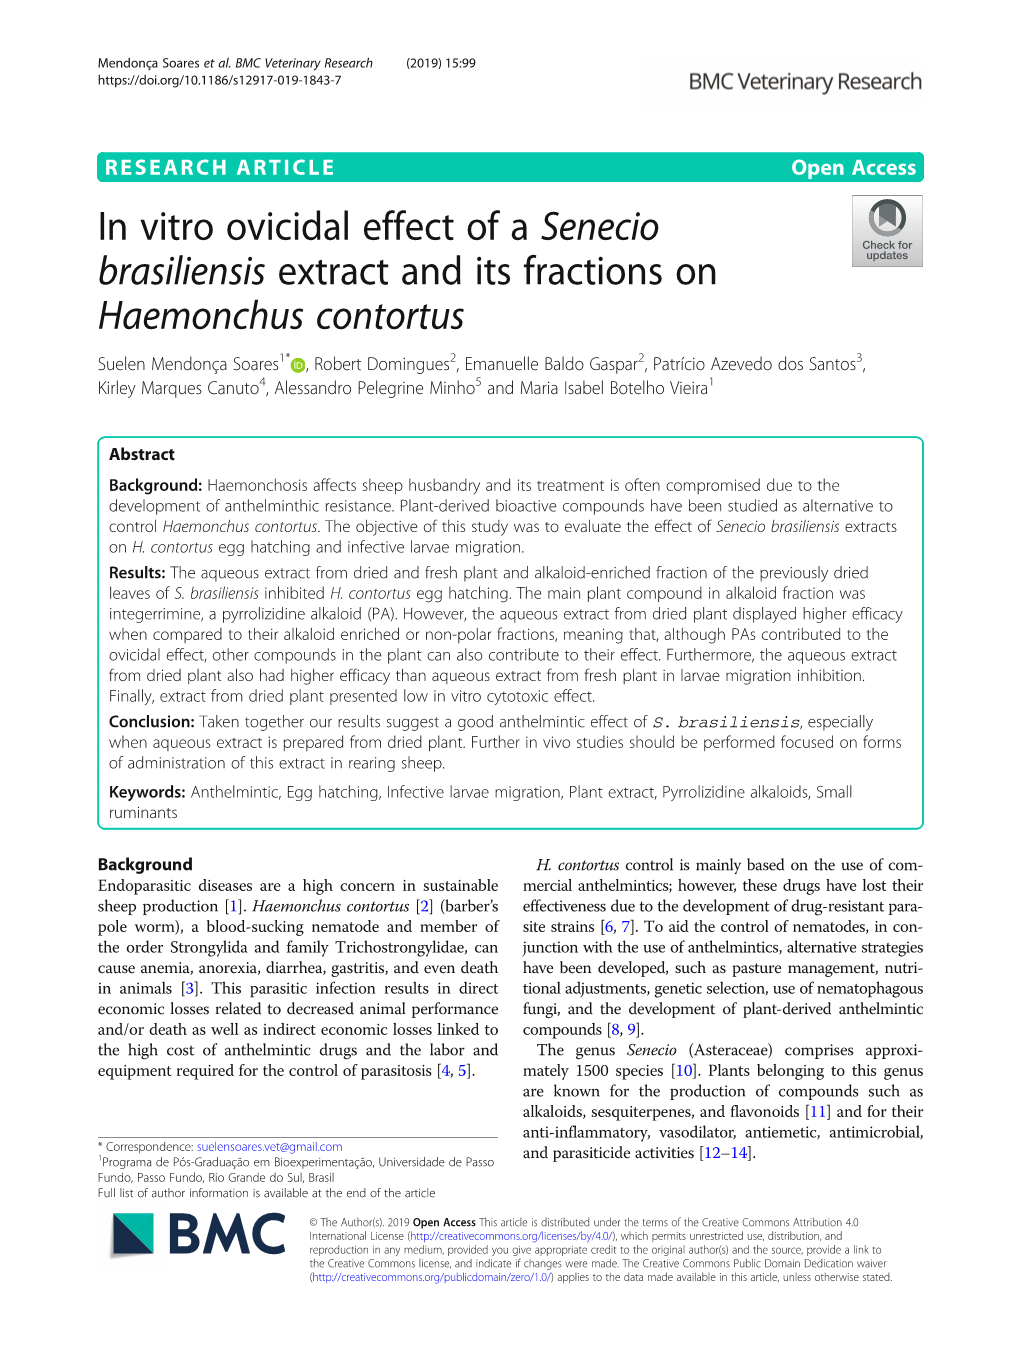 In Vitro Ovicidal Effect of a Senecio Brasiliensis Extract and Its Fractions on Haemonchus Contortus